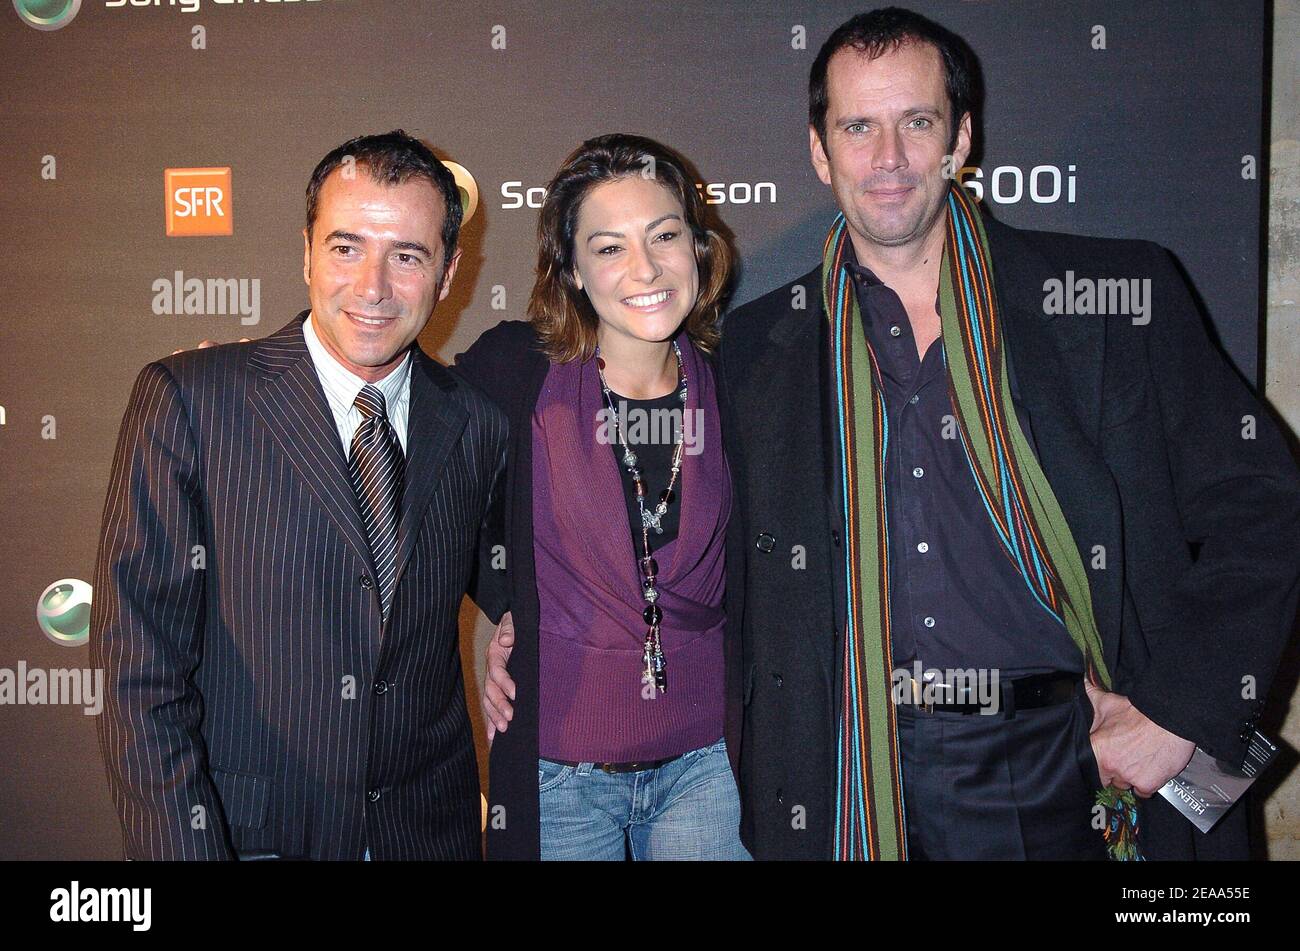 (L-R) French TV presenter Bernard Montiel, actress Shirley Bousquet and actor Christian Vadim attend the opening of Danish top model Helena Christensen's photo exhibition, 'An Eye for Beauty', held at the Galerie Diana Marquardt in Paris, France, on October 21, 2005. The pictures have been taken with a Sony Ericsson K750i mobile phone. Photo by Bruno Klein/ABACAPRESS.COM. Stock Photo